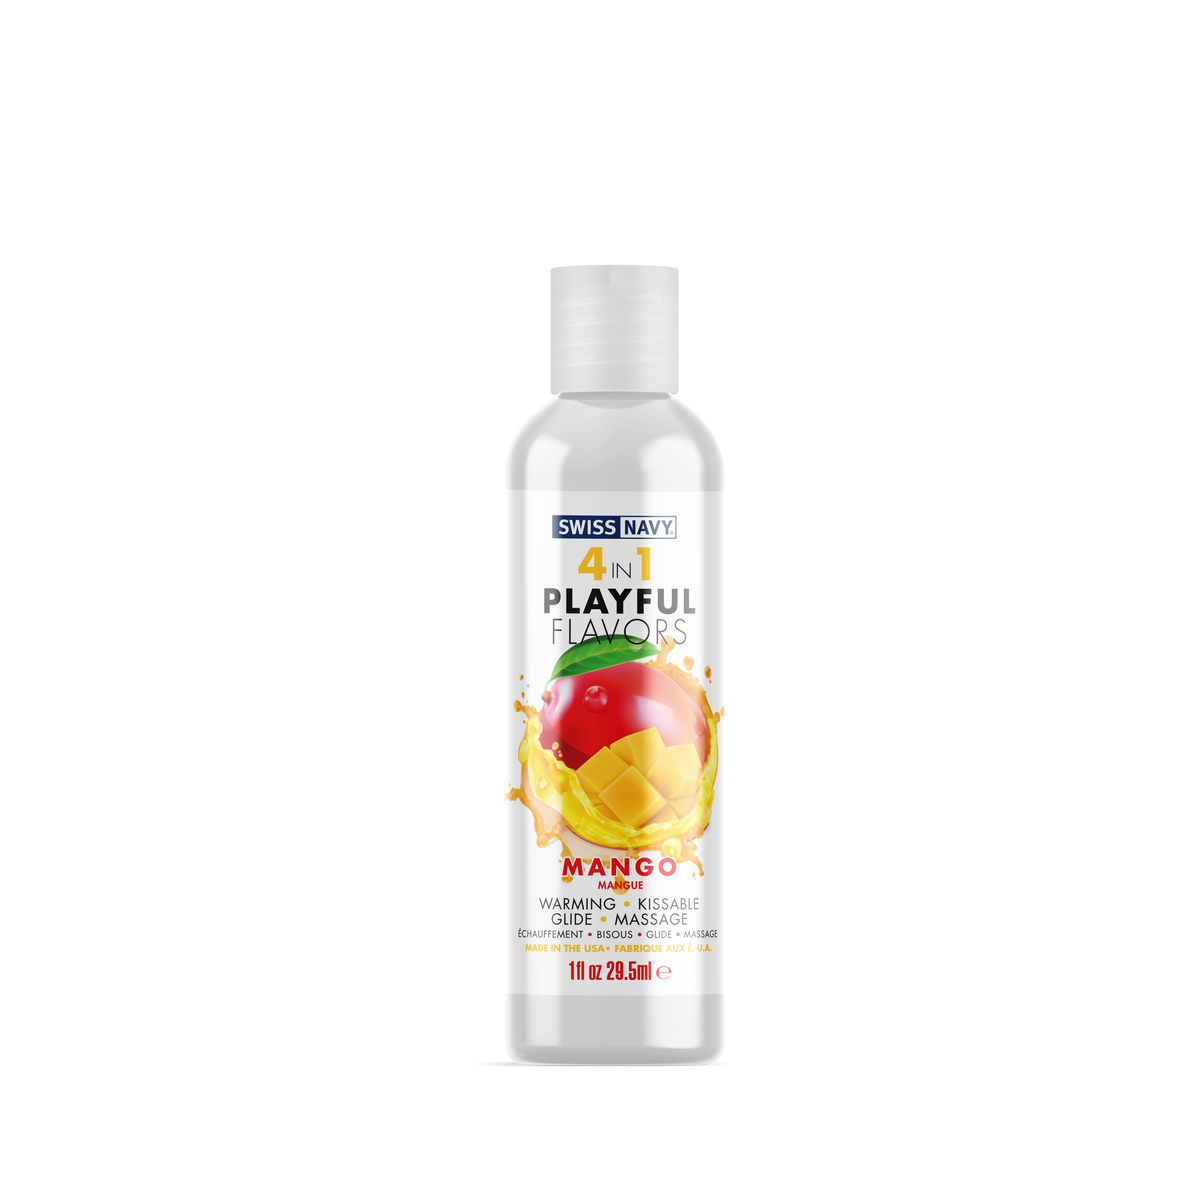 4 in 1 - Playful Flavors - Mango